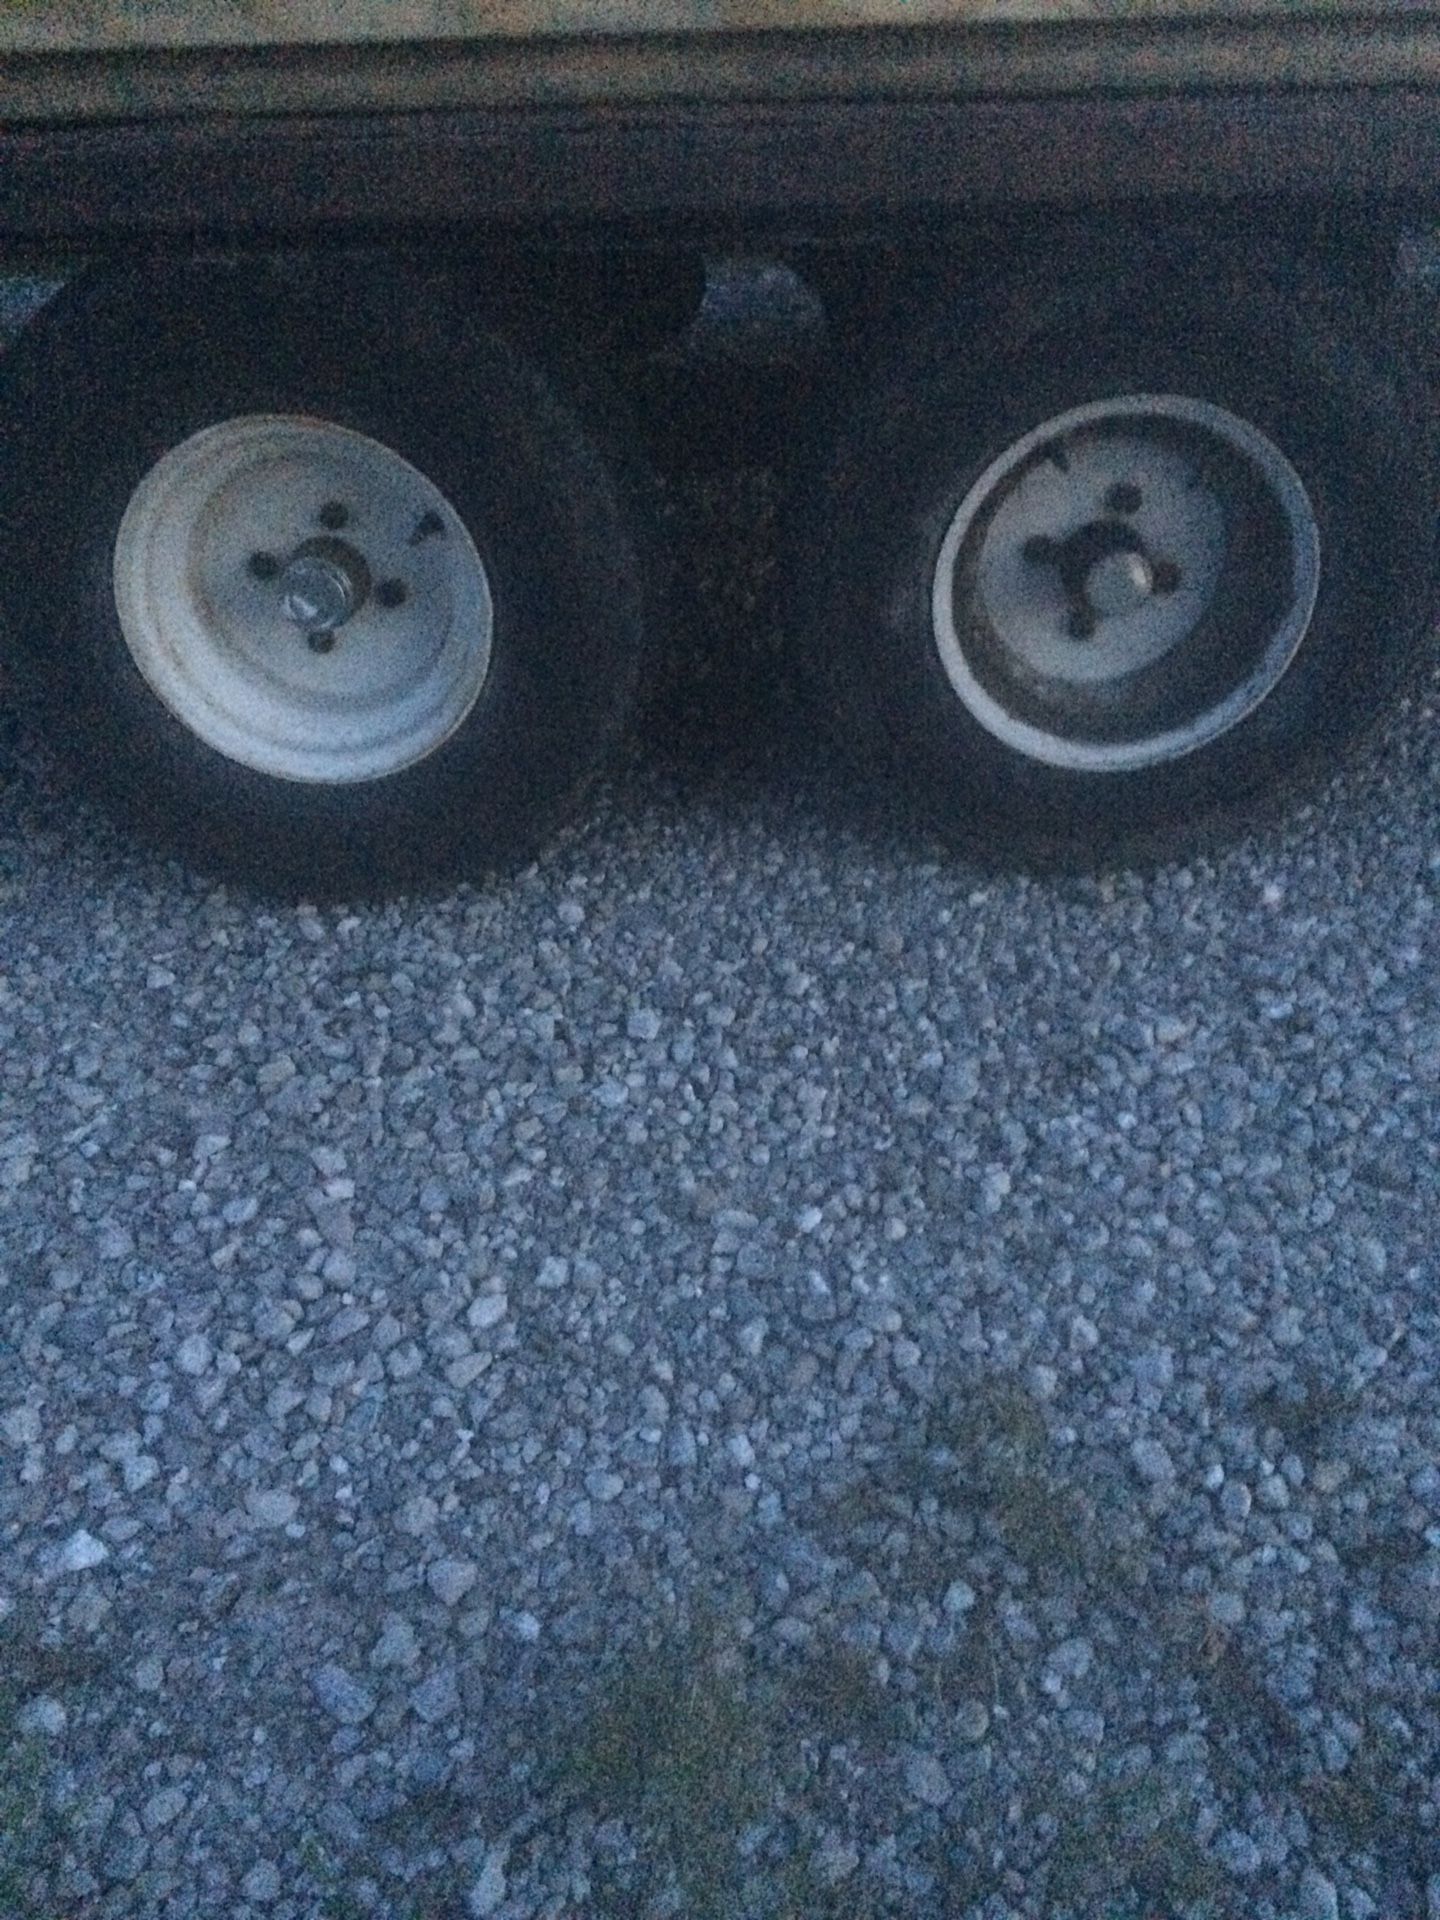 Wanted 10" tires for trailer